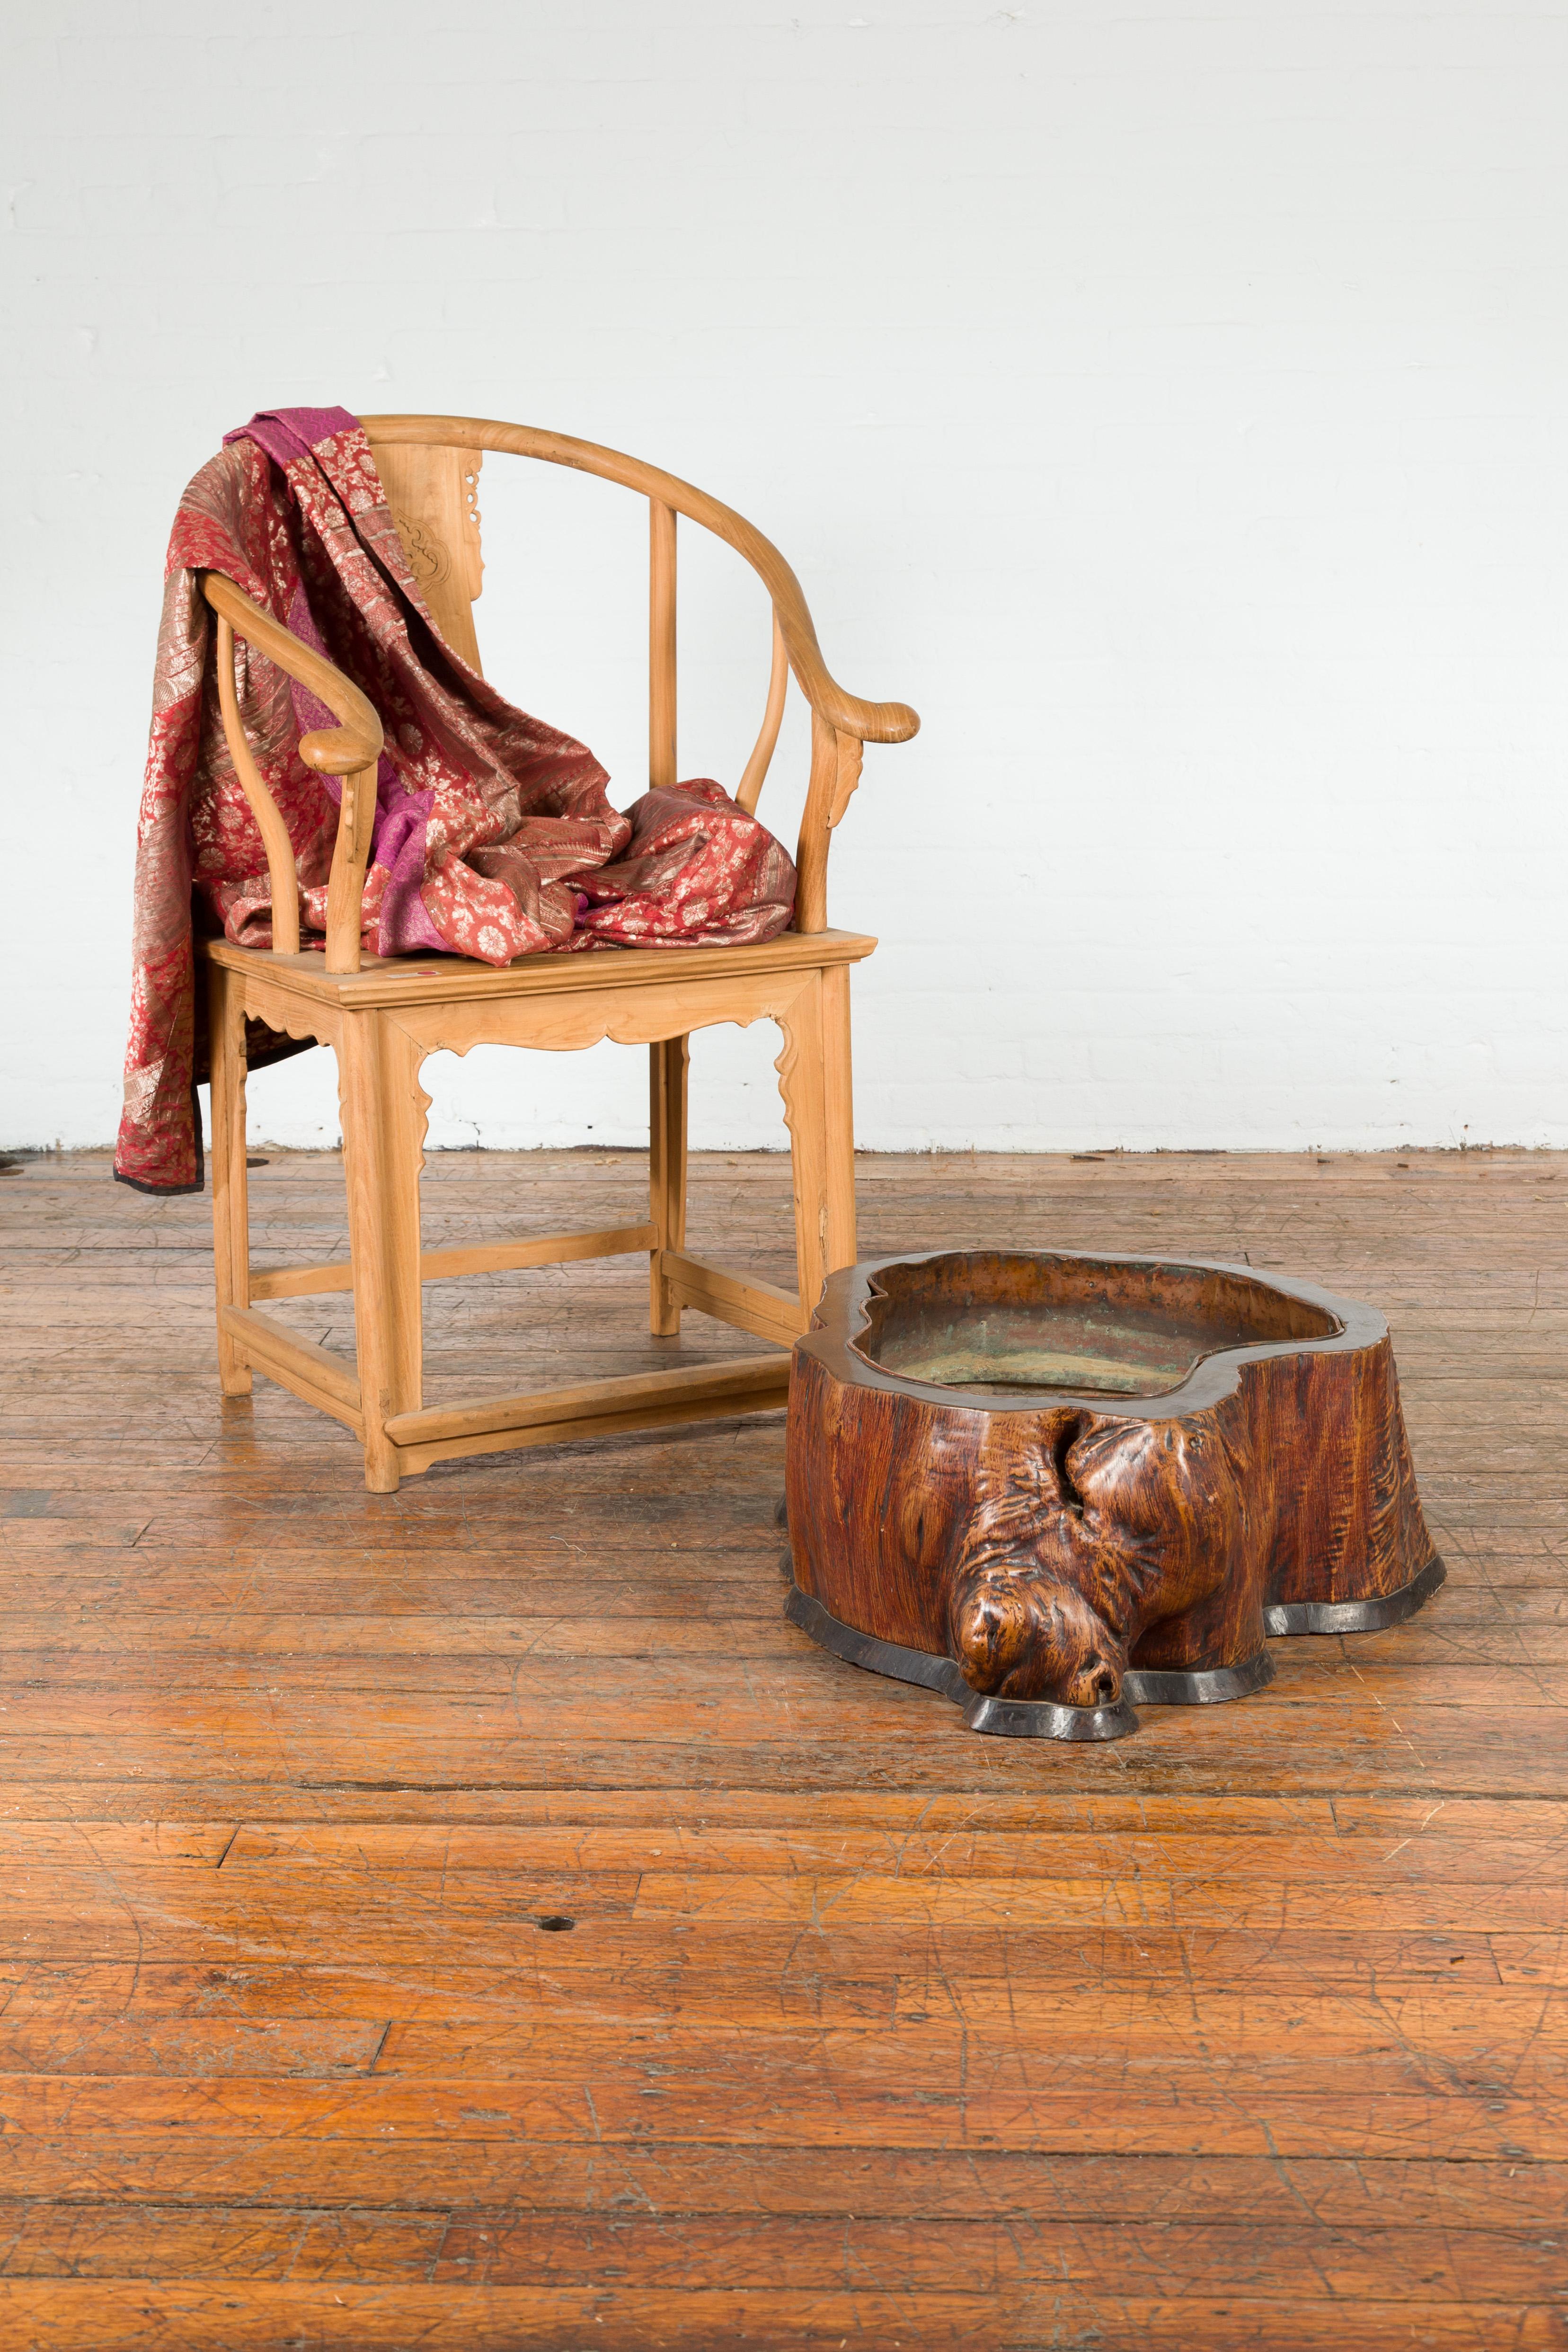 A Japanese Meiji period hibachi from the 19th century made from a tree trunk, with copper lining. Used for cooking or warming sake or tea, this 19th century Japanese hibachi charms our eyes with its rustic appearance. Made from the root of a tree